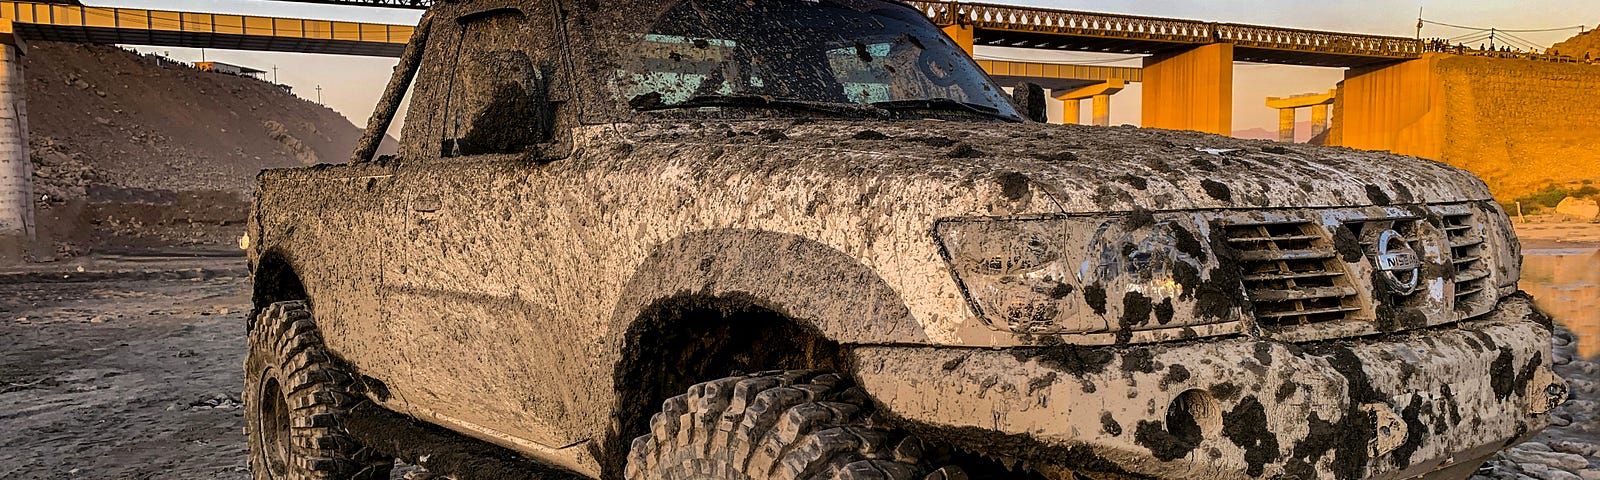 This shows a muddy truck